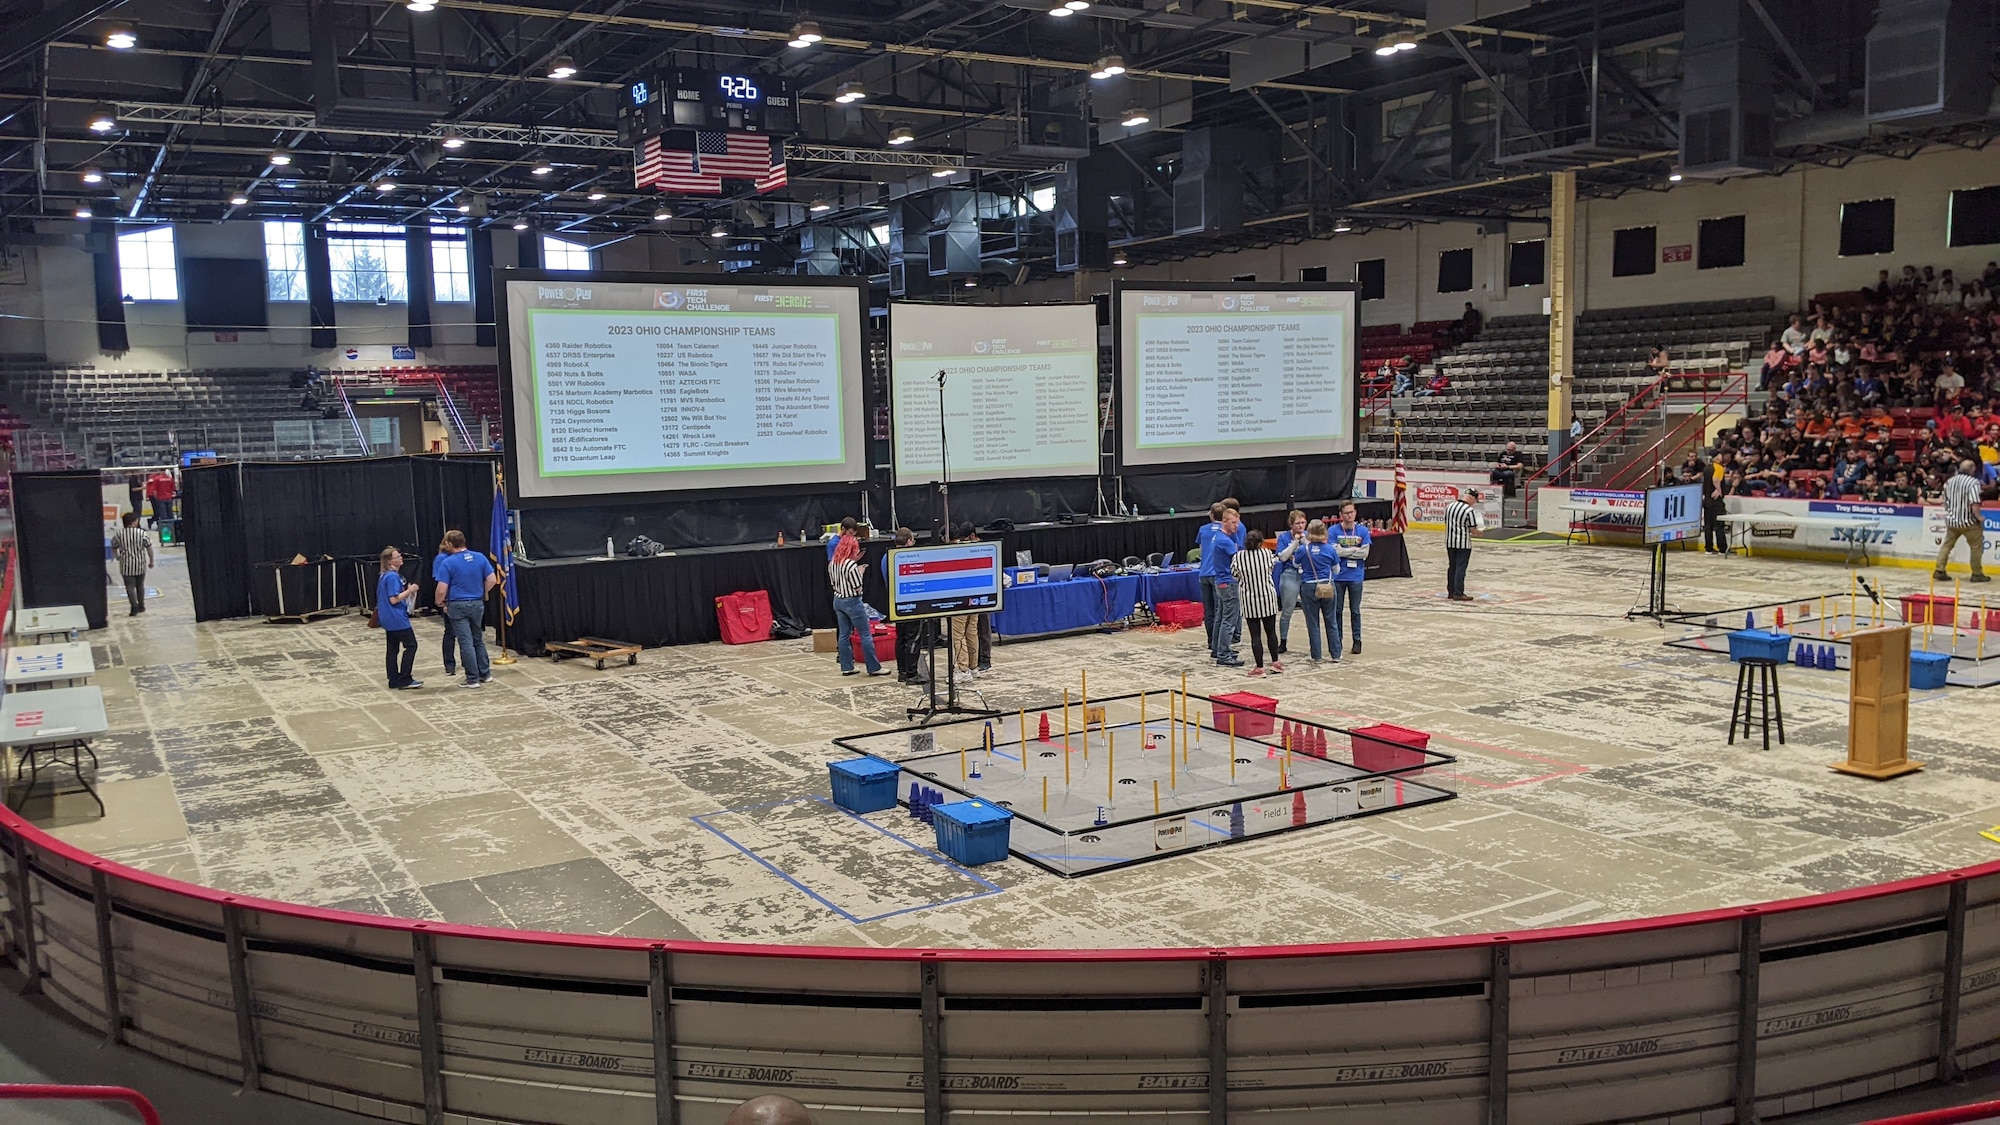 The competition area inside the Hobart Arena in Troy, Ohio, with competitors preparing for the For Inspiration and Recognition of Science and Technology, or FIRST, Tech Challenge Ohio State Championship March 11, 2023. Senior Air Force Research Laboratory leaders joined middle and high school students as they competed in the FIRST event, which encouraged students to pursue careers in science, technology, engineering and math. (U.S. Air Force photo / Jeremy Dunn)